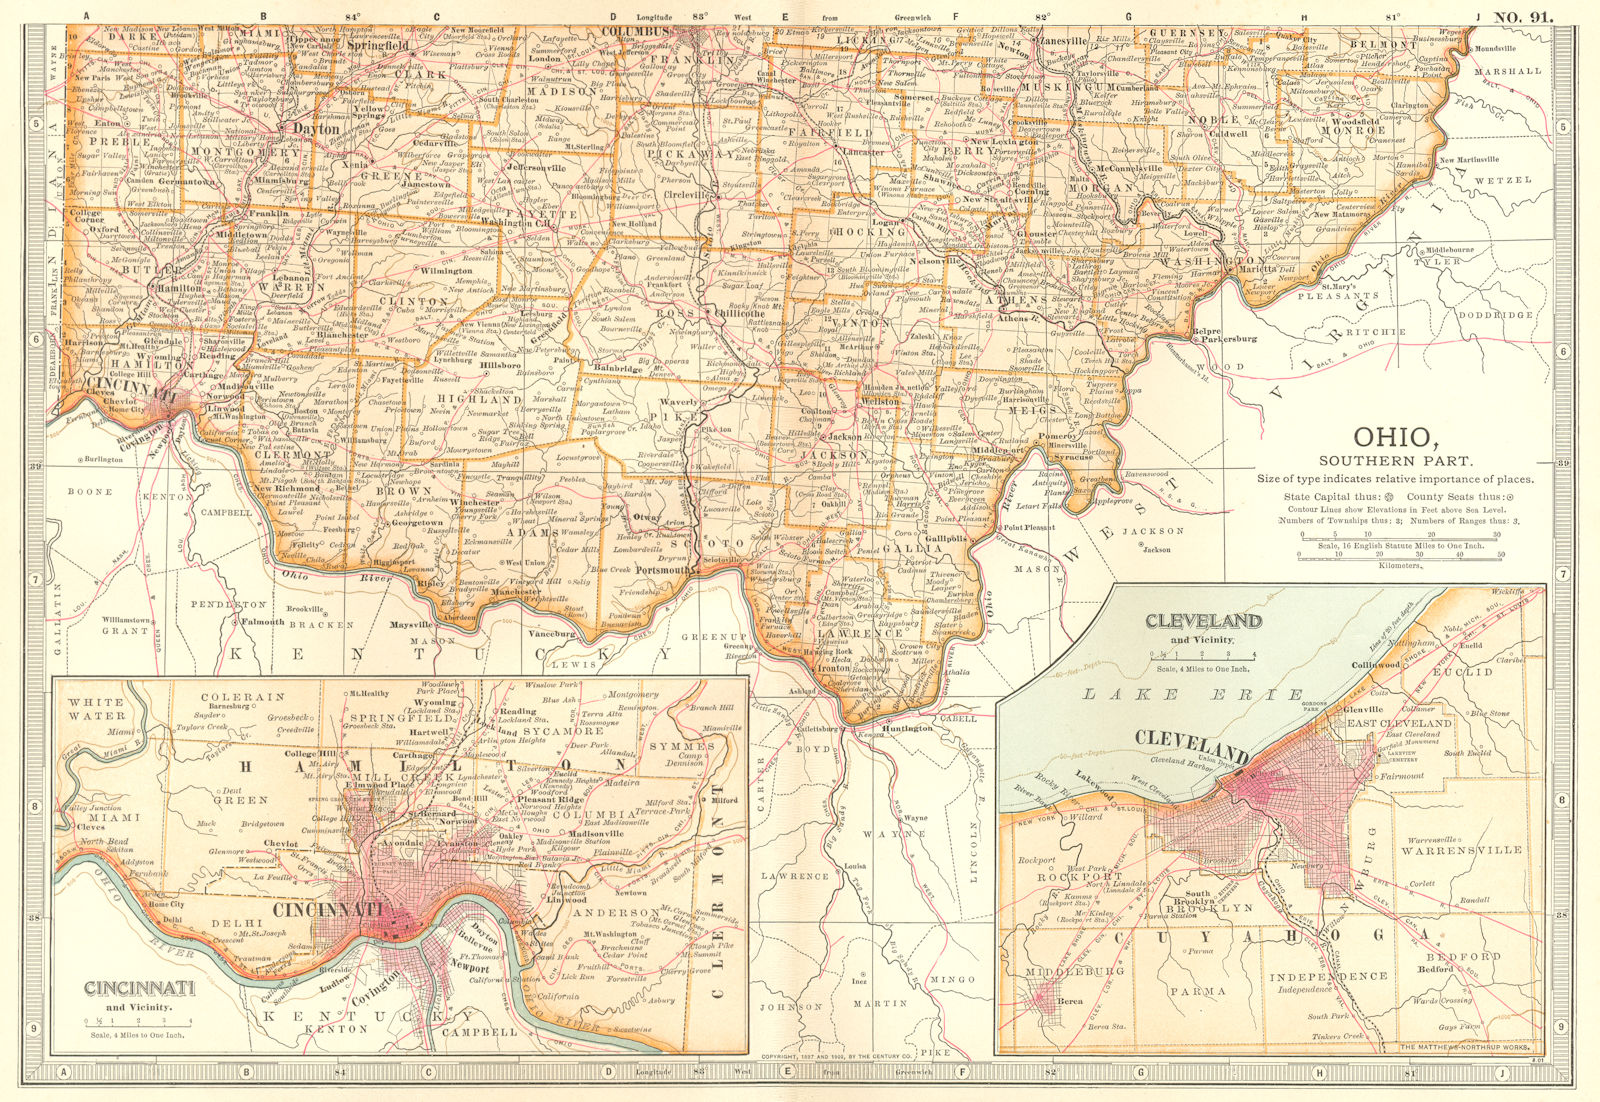 OHIO SOUTH. State map showing counties. Inset Cincinnati & Cleveland 1903